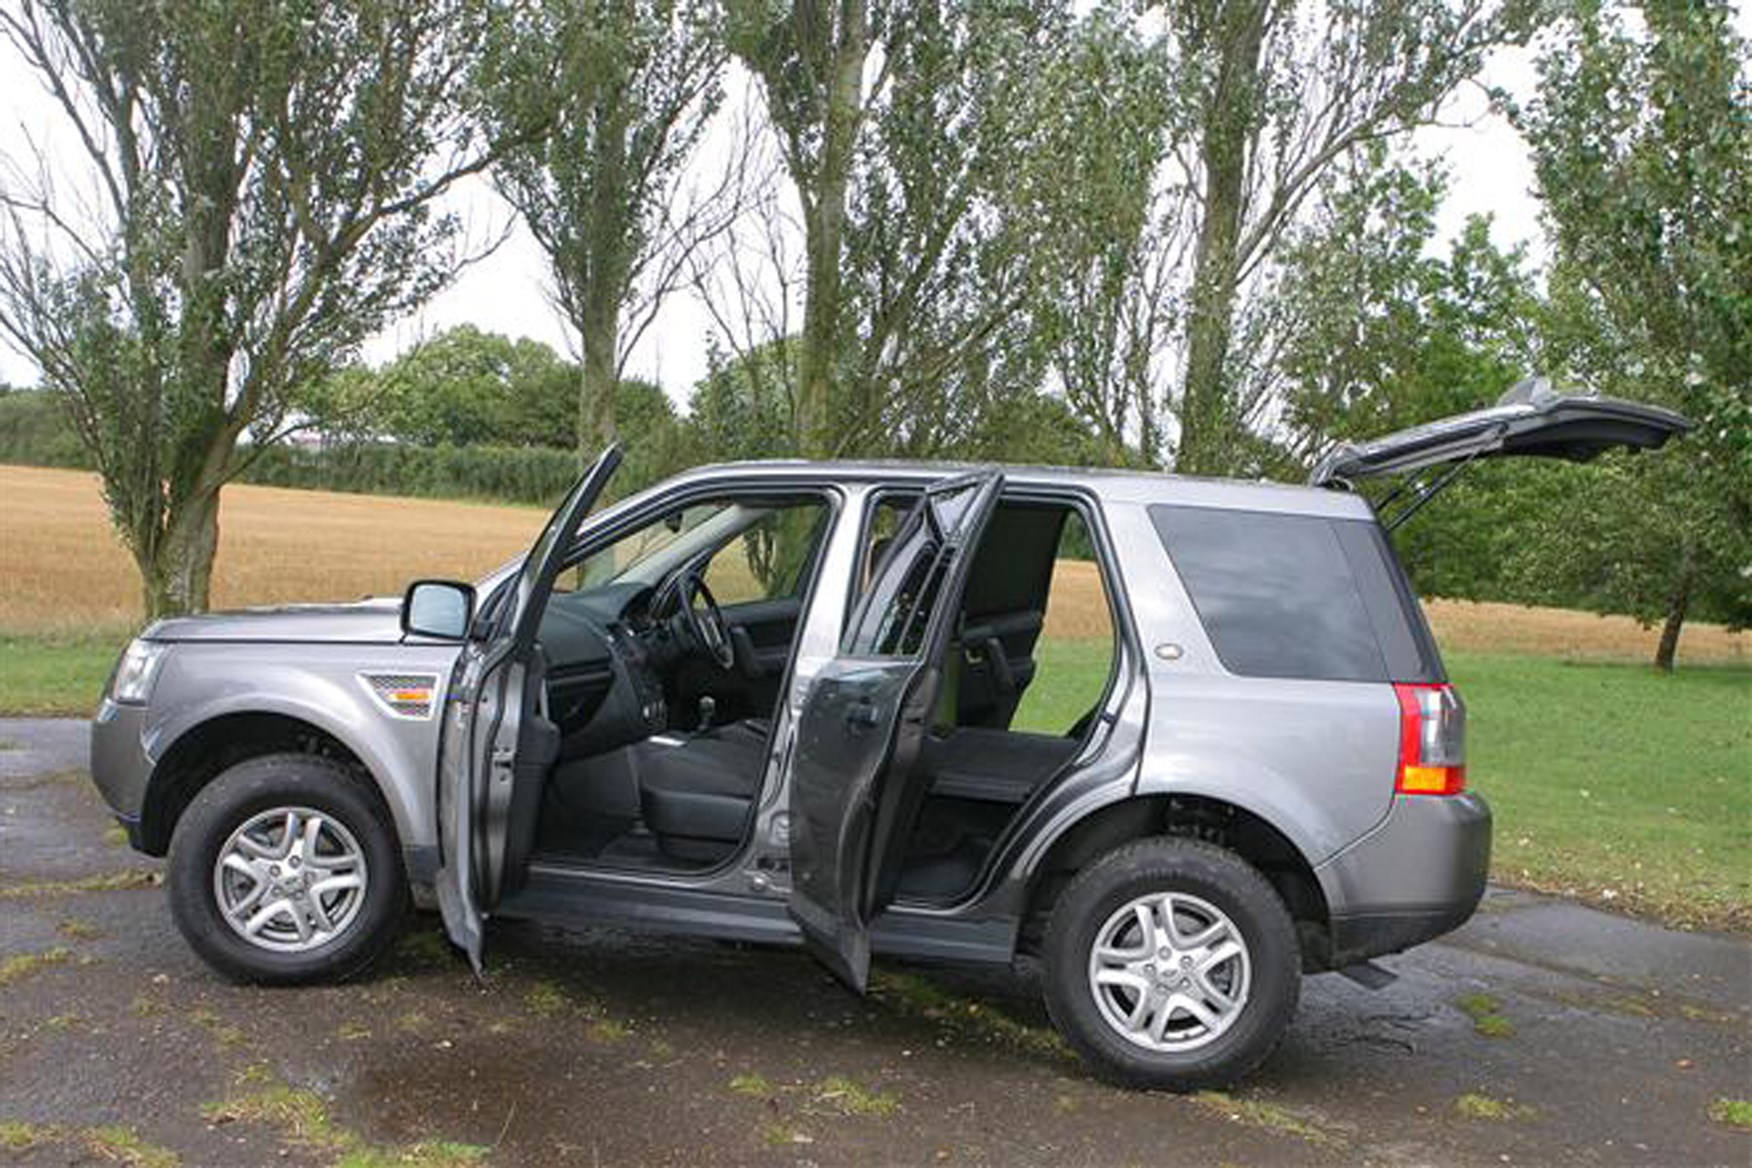 Land Rover Freelander review on Parkers Vans - load area access